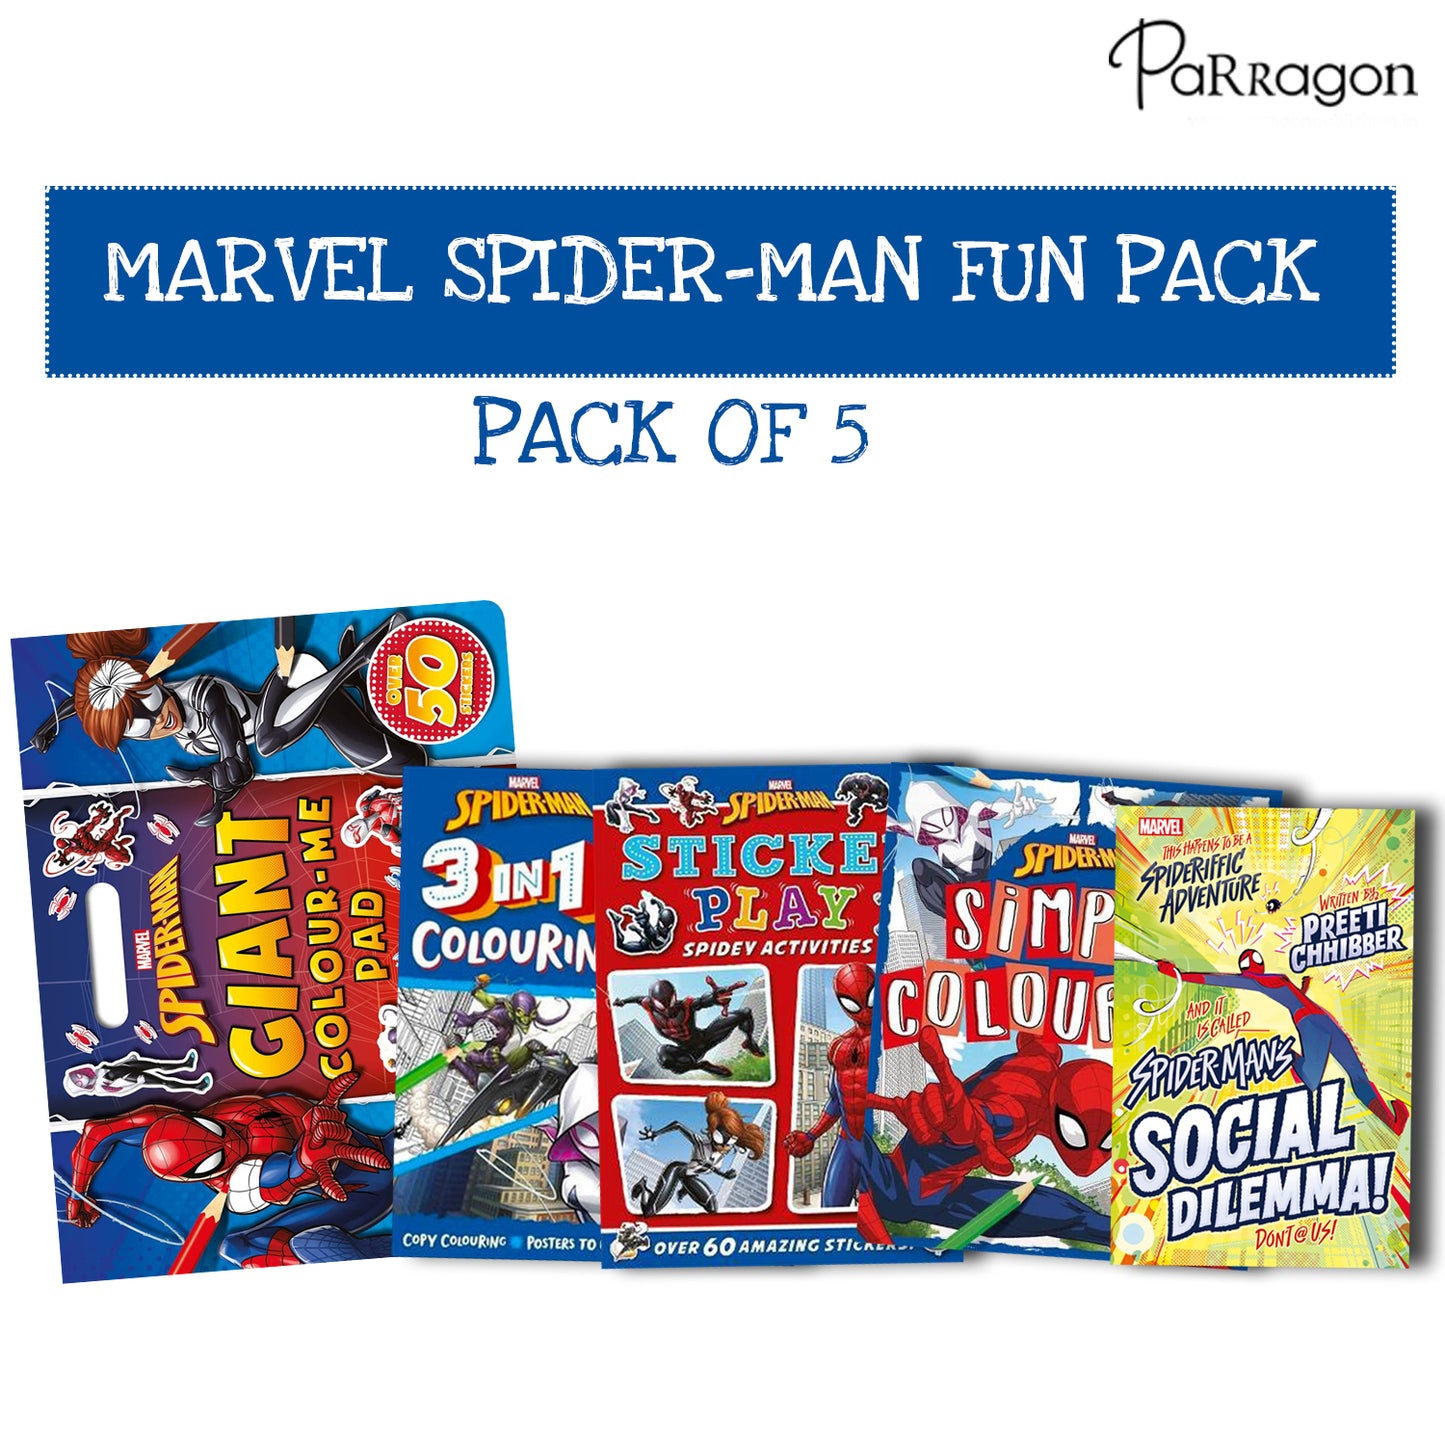 Marvel Spider Man - Fun Pack of 5 Activity Book| 3 in 1 Colouring| Sticker Play [Paperback] Parragon